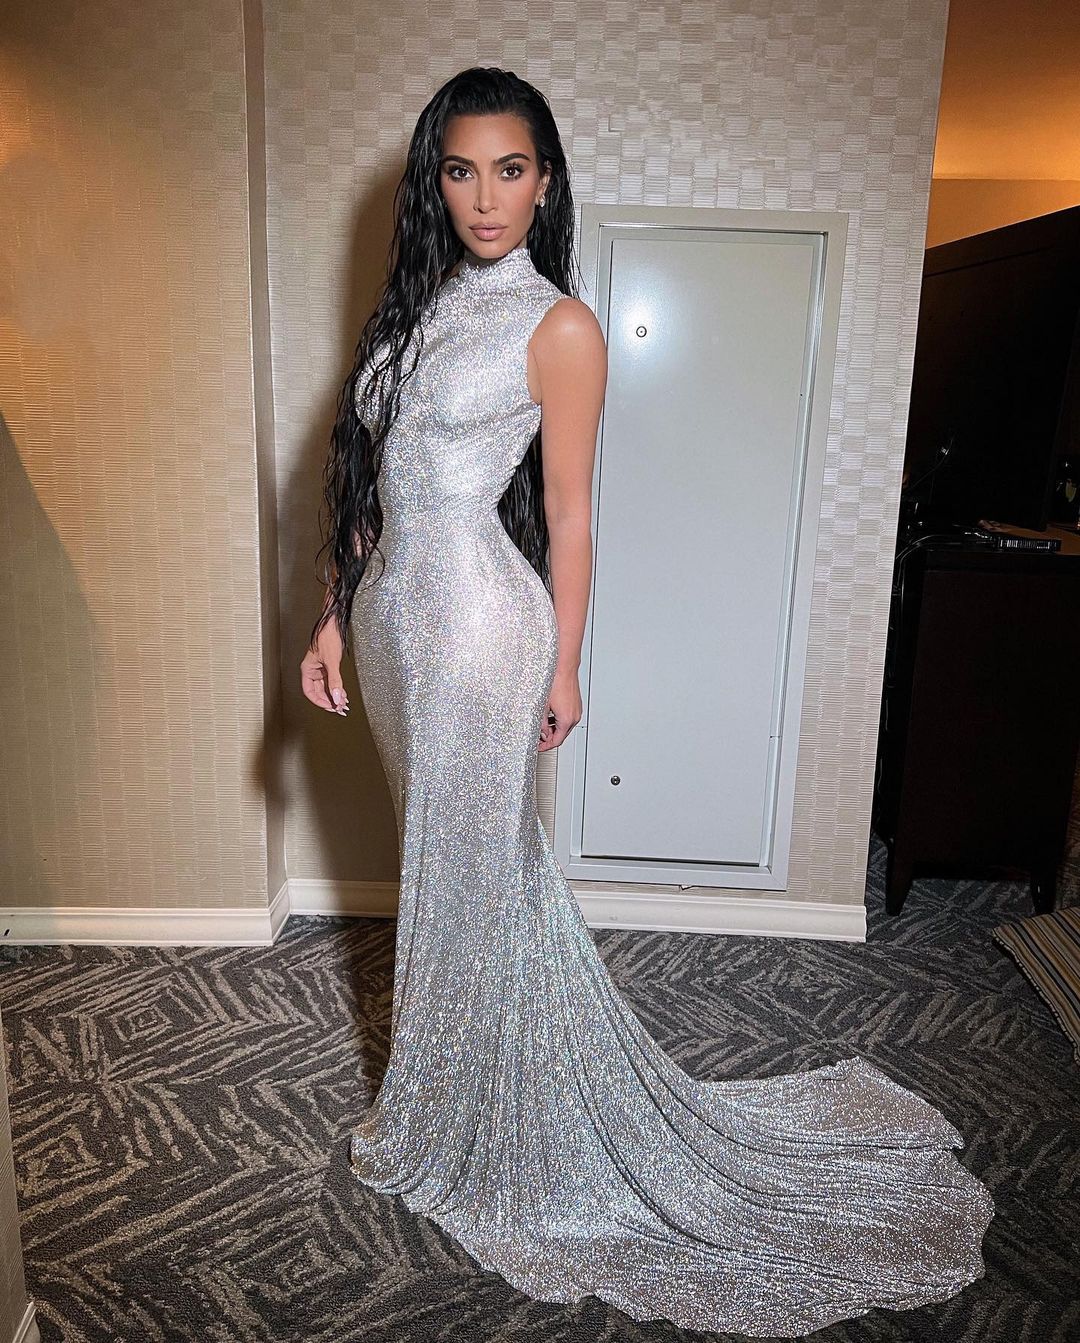 How Much Weight Did Kim Kardashian Lose To Fit In Dress?